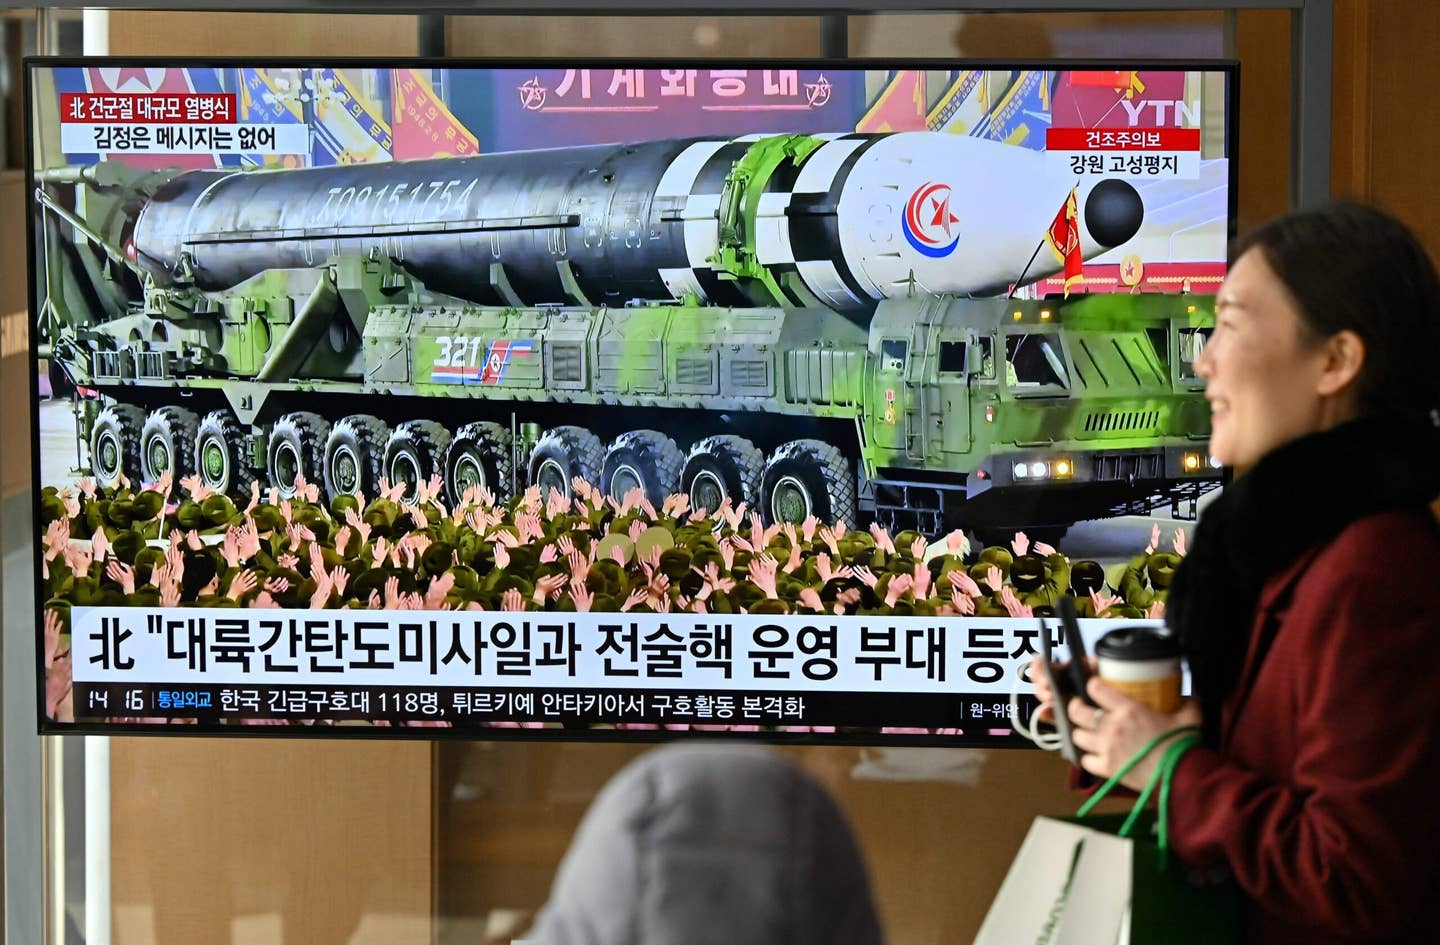 A woman walks past a television screen showing a news broadcast with an image of the North Korean military parade held in Pyongyang to mark the 75th founding anniversary of its armed forces, at a railway station in Seoul on February 9, 2023. <em>Photo by JUNG YEON-JE/AFP via Getty Images</em>